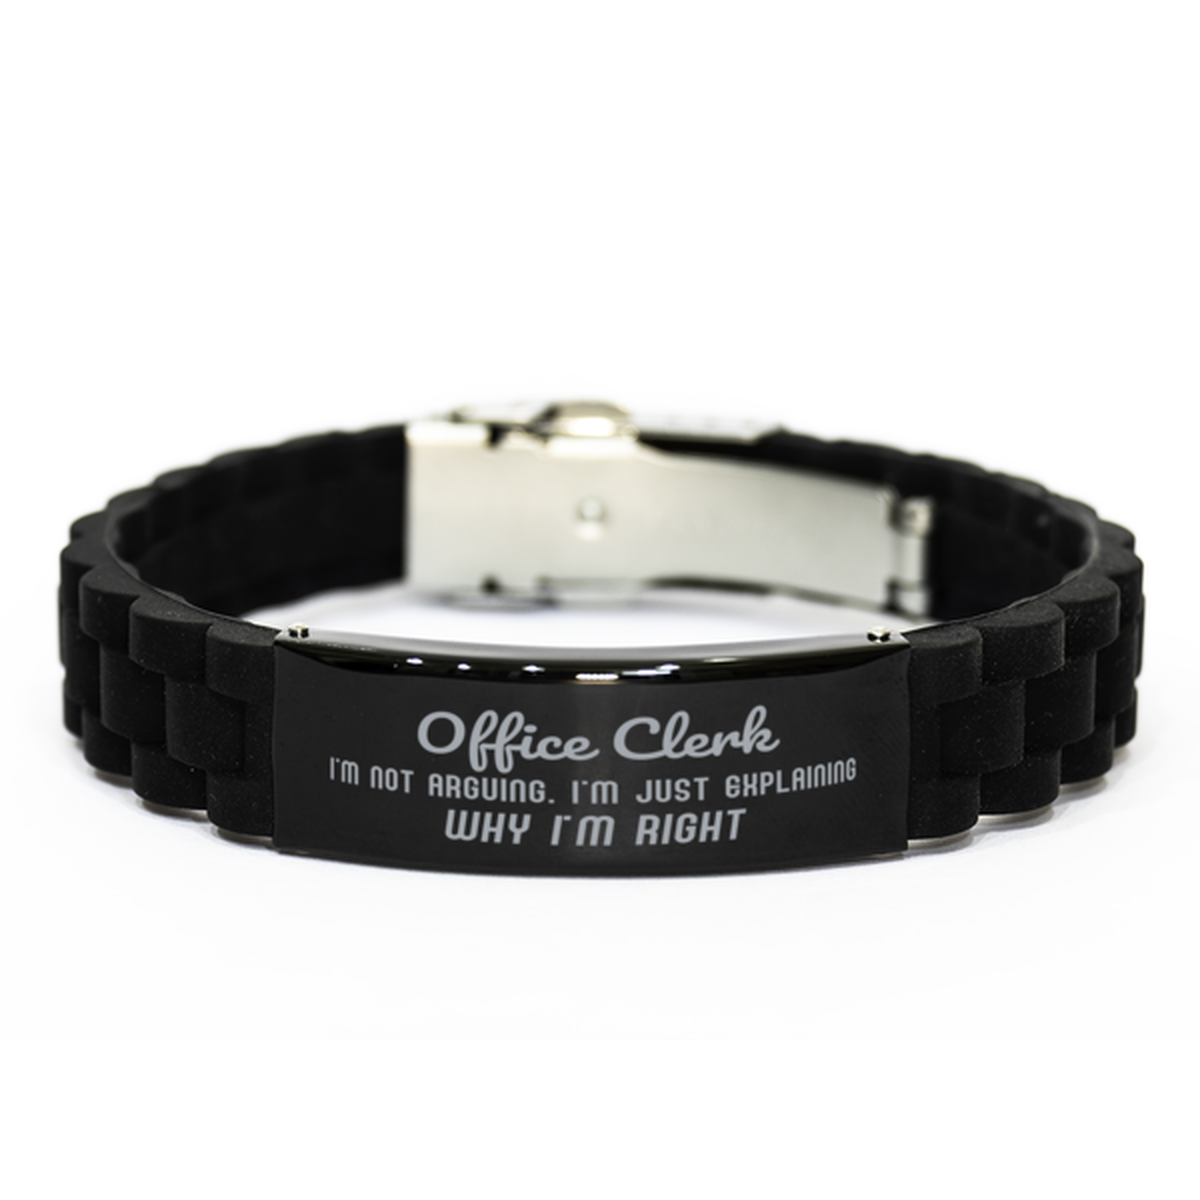 Office Clerk I'm not Arguing. I'm Just Explaining Why I'm RIGHT Black Glidelock Clasp Bracelet, Funny Saying Quote Office Clerk Gifts For Office Clerk Graduation Birthday Christmas Gifts for Men Women Coworker